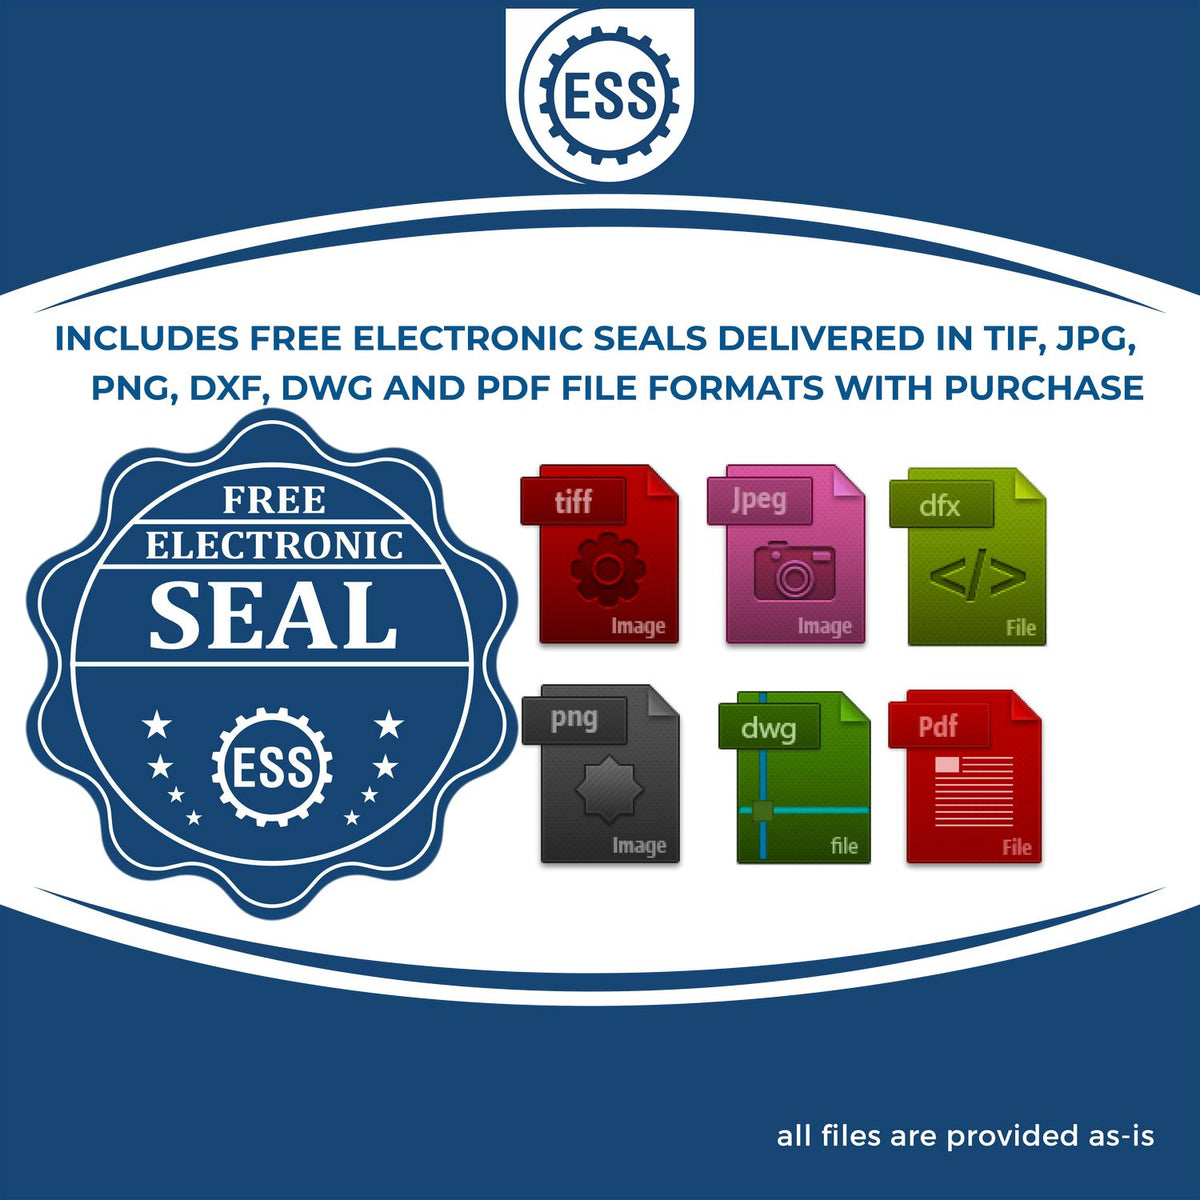 An infographic for the free electronic seal for the Soft Louisiana Professional Geologist Seal illustrating the different file type icons such as DXF, DWG, TIF, JPG and PNG.